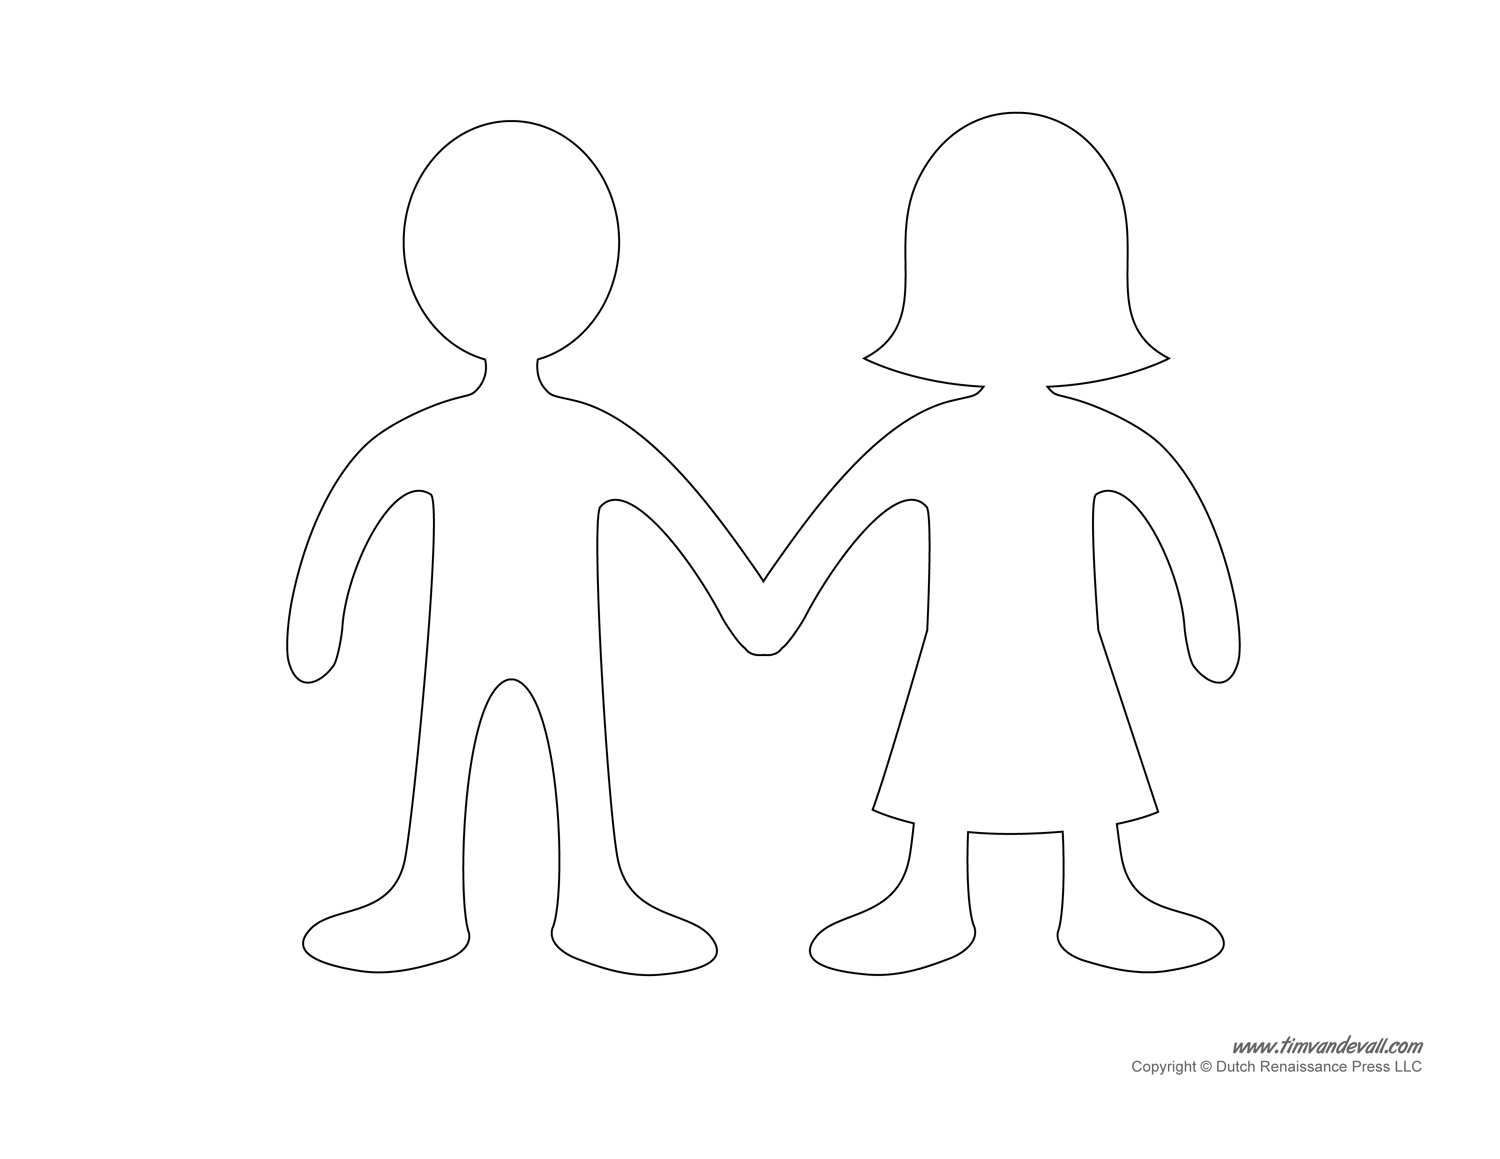 Printable Paper Doll Templates   Make Your Own Paper Dolls